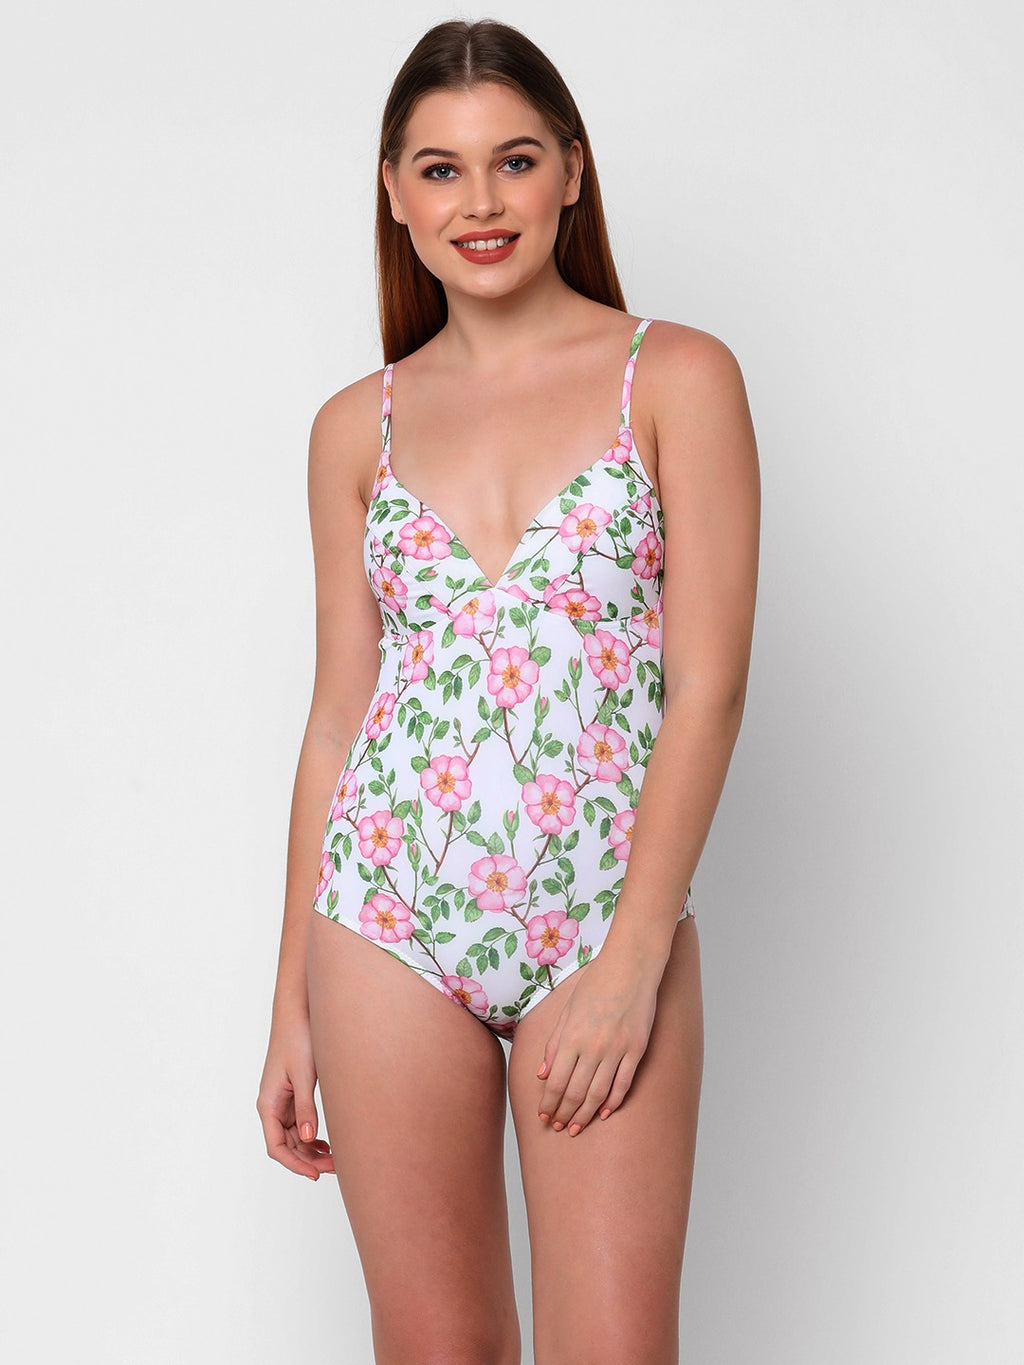 The Beach company India - shop floral printed swimwear online india - Printed one- piece - low plunge neckline - Padded swimwear - full coverage swimsuit - strappy swimsuits - printed beachwear 